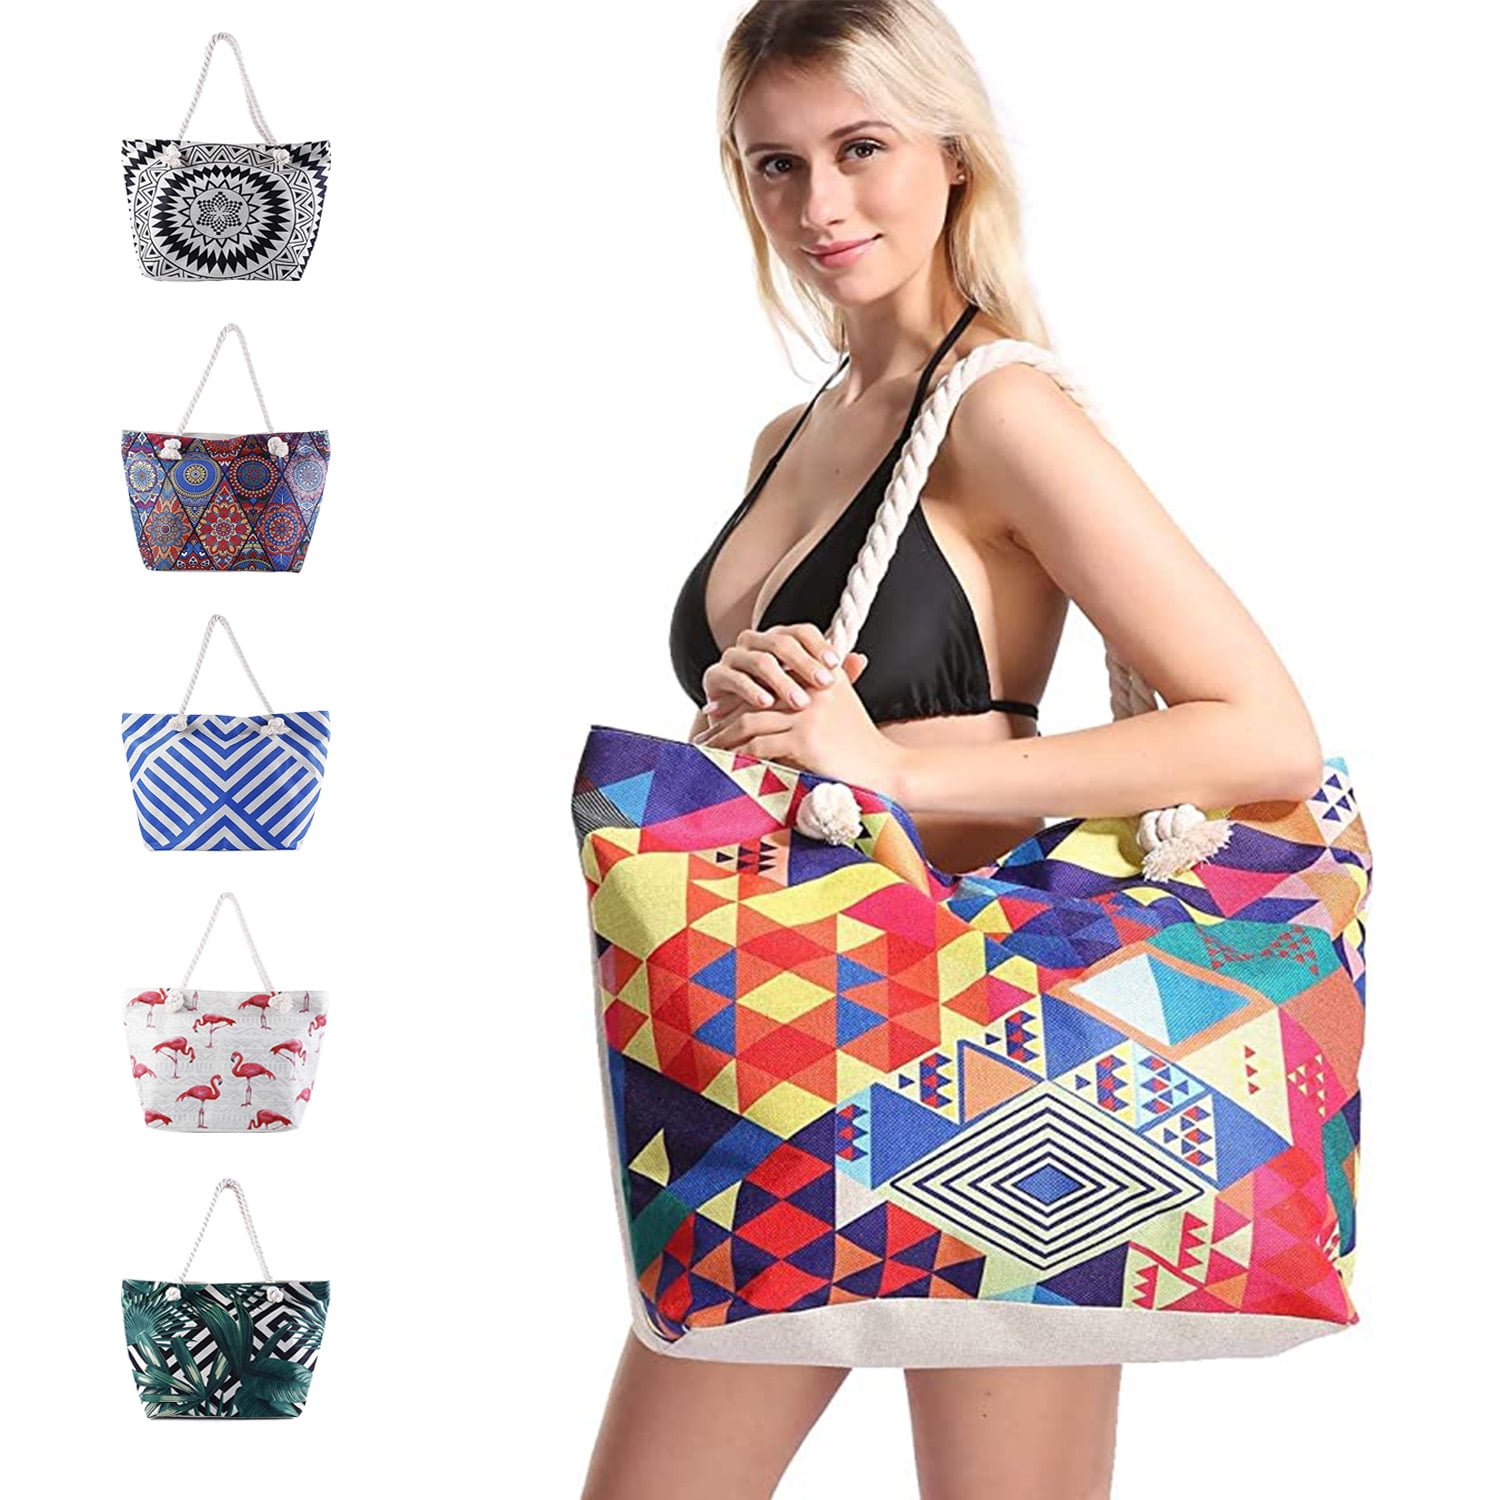 Women Large Beach Bag Canvas Waterproof Tote Bag with Zipper Pockets for Swim Pool Gym Hiking Picnic Travel 